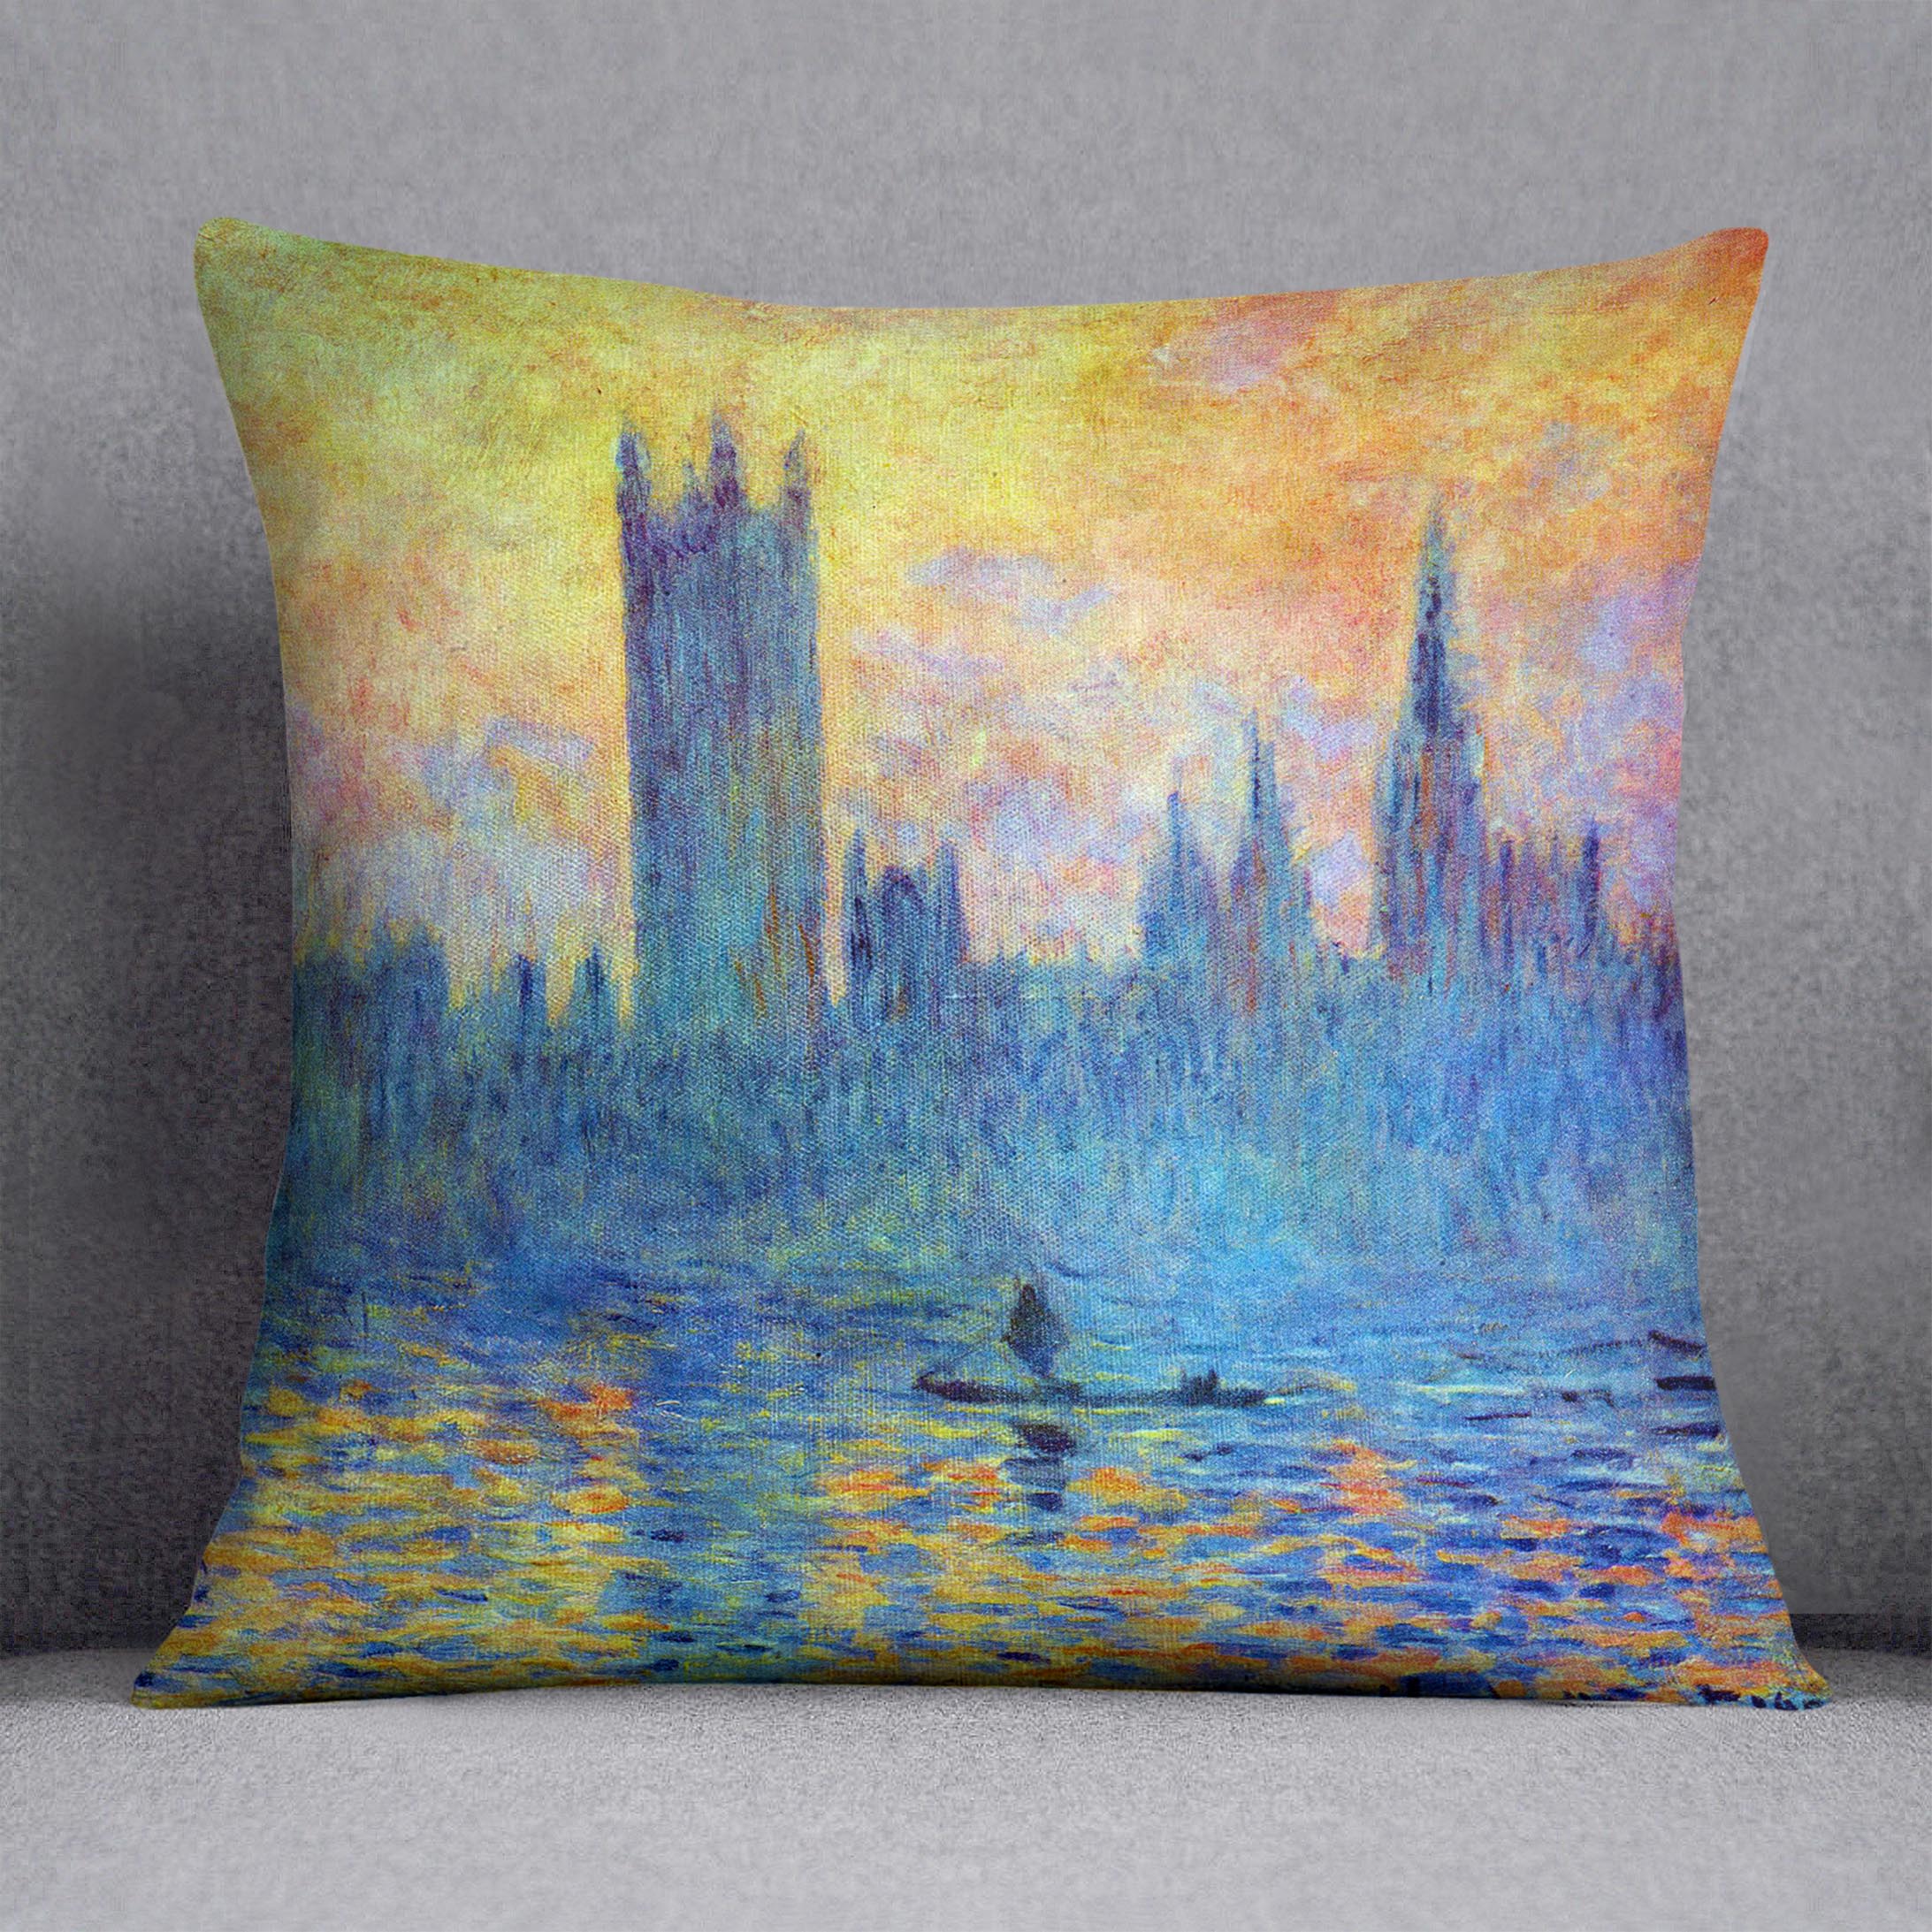 London Parliament in Winter by Monet Cushion